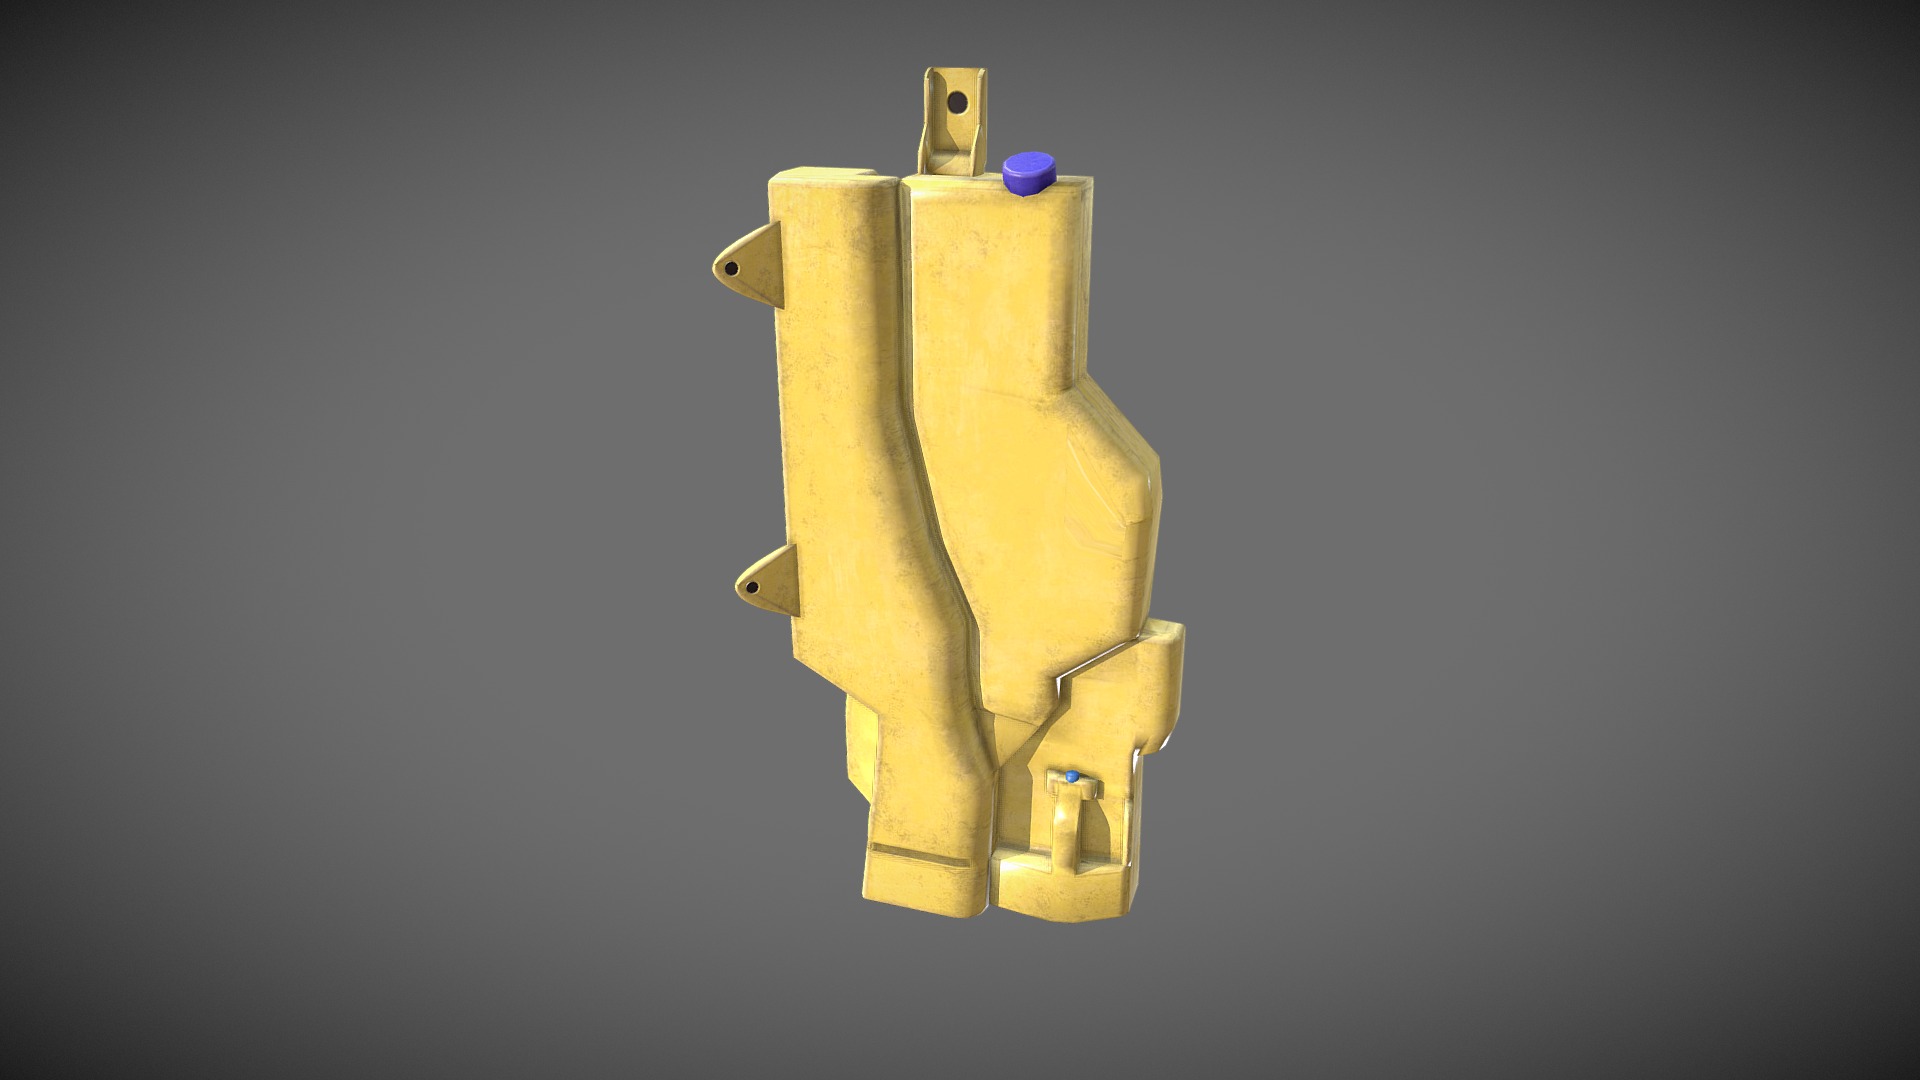 3D model Whiper washer item - This is a 3D model of the Whiper washer item. The 3D model is about a gold and blue object.